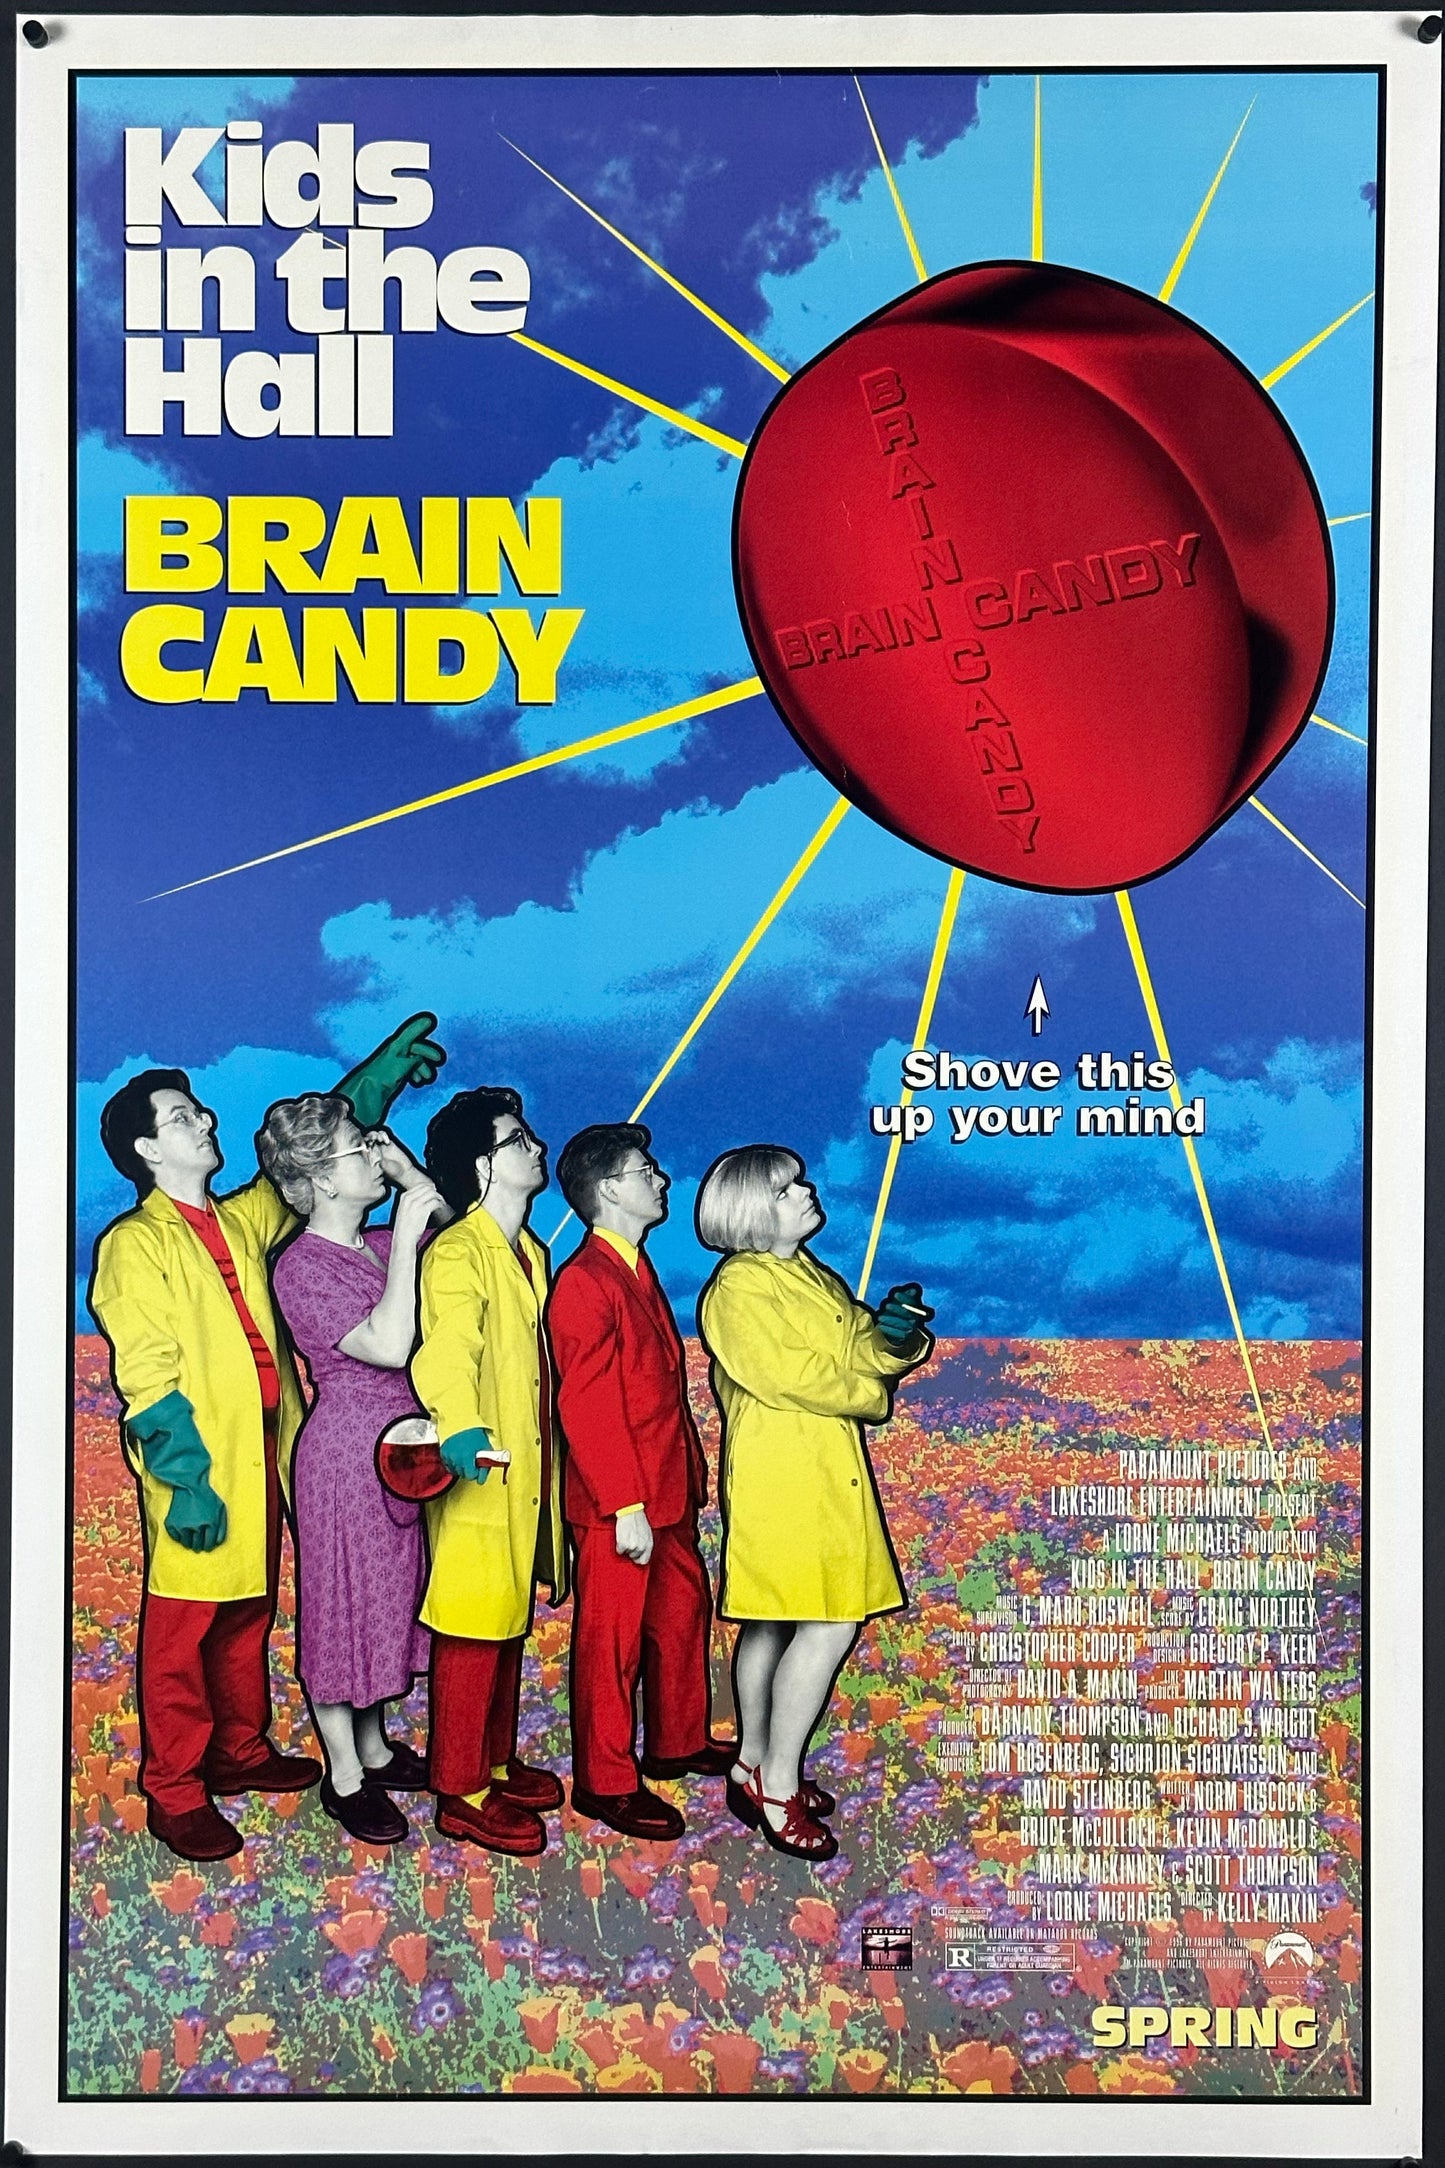 Kids in the Hall: Brain Candy - posterpalace.com